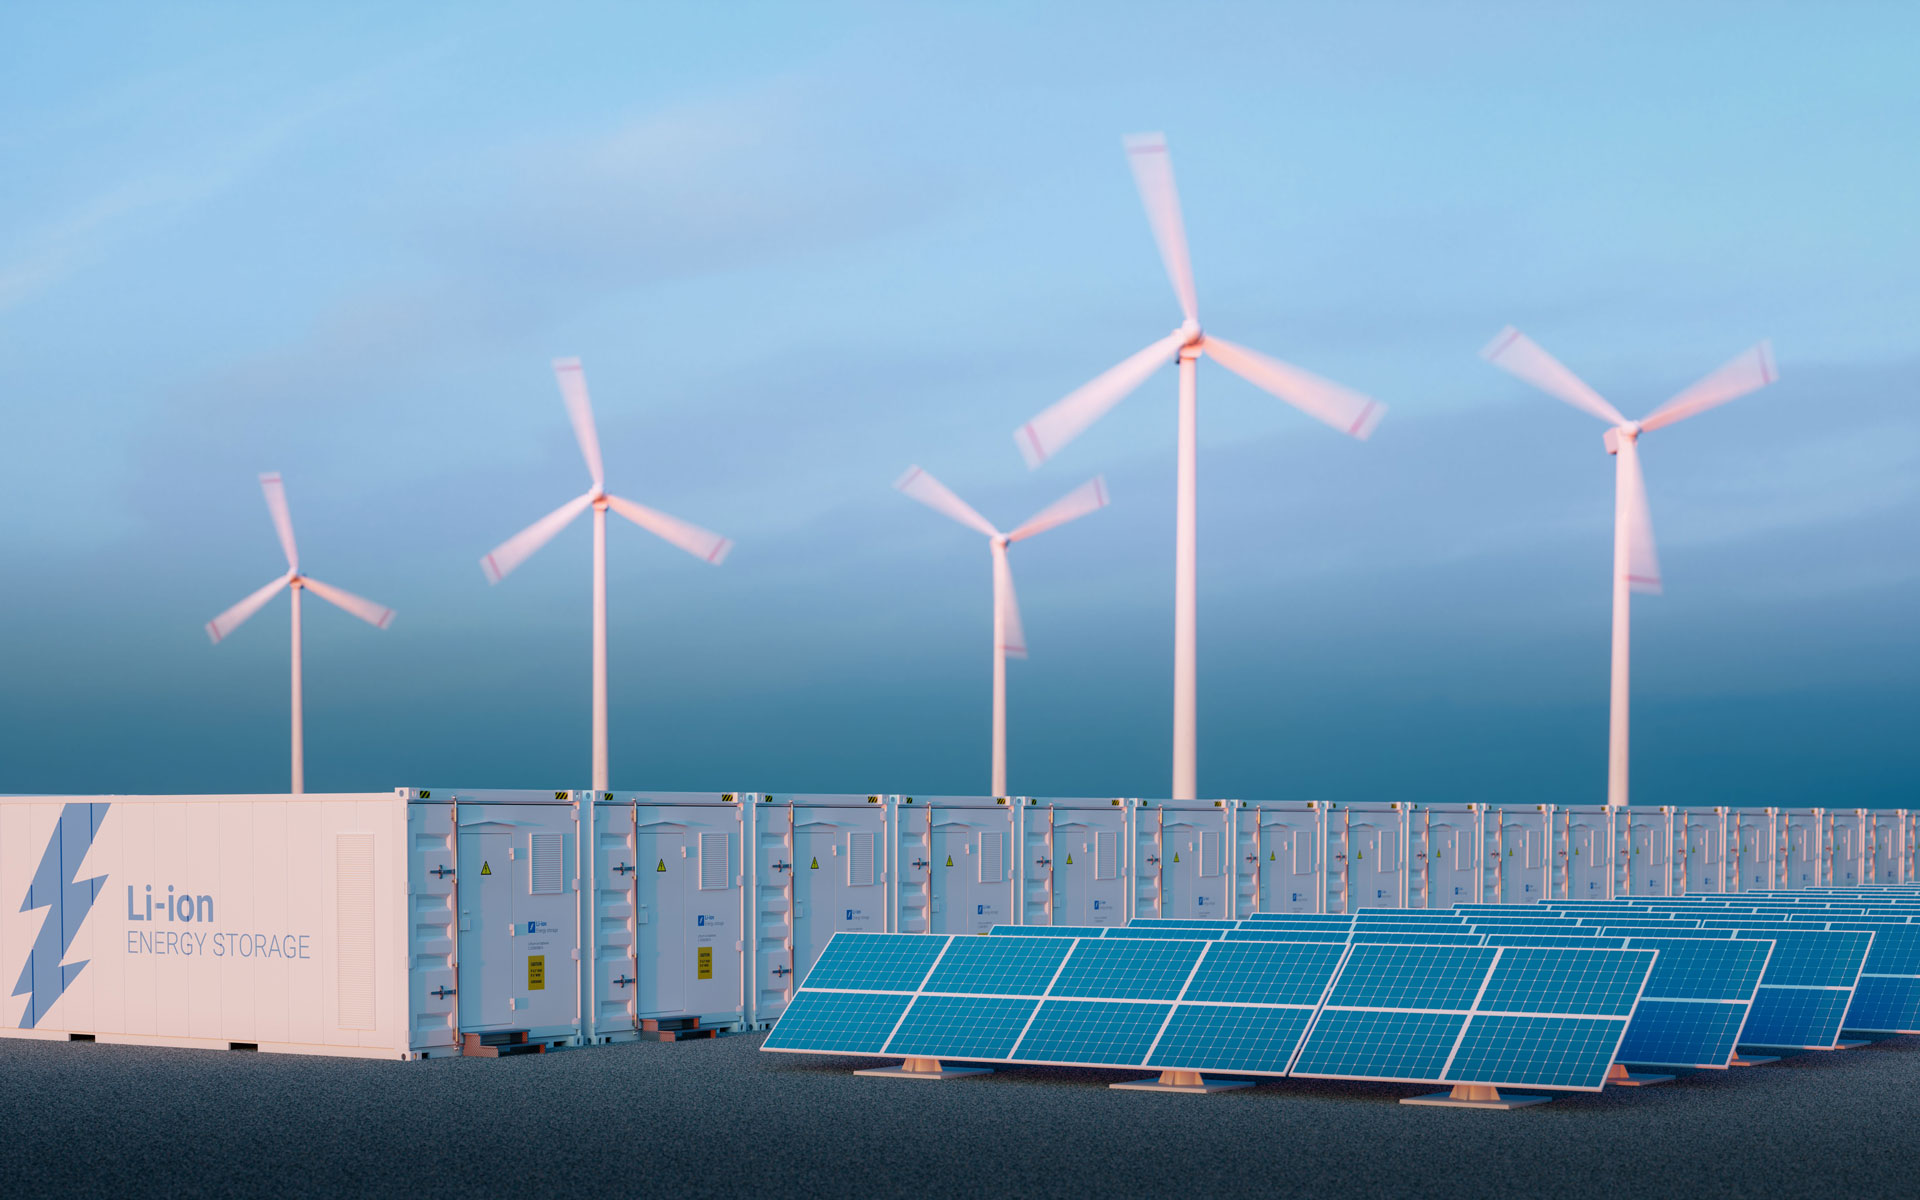 Distributed energy storage systems